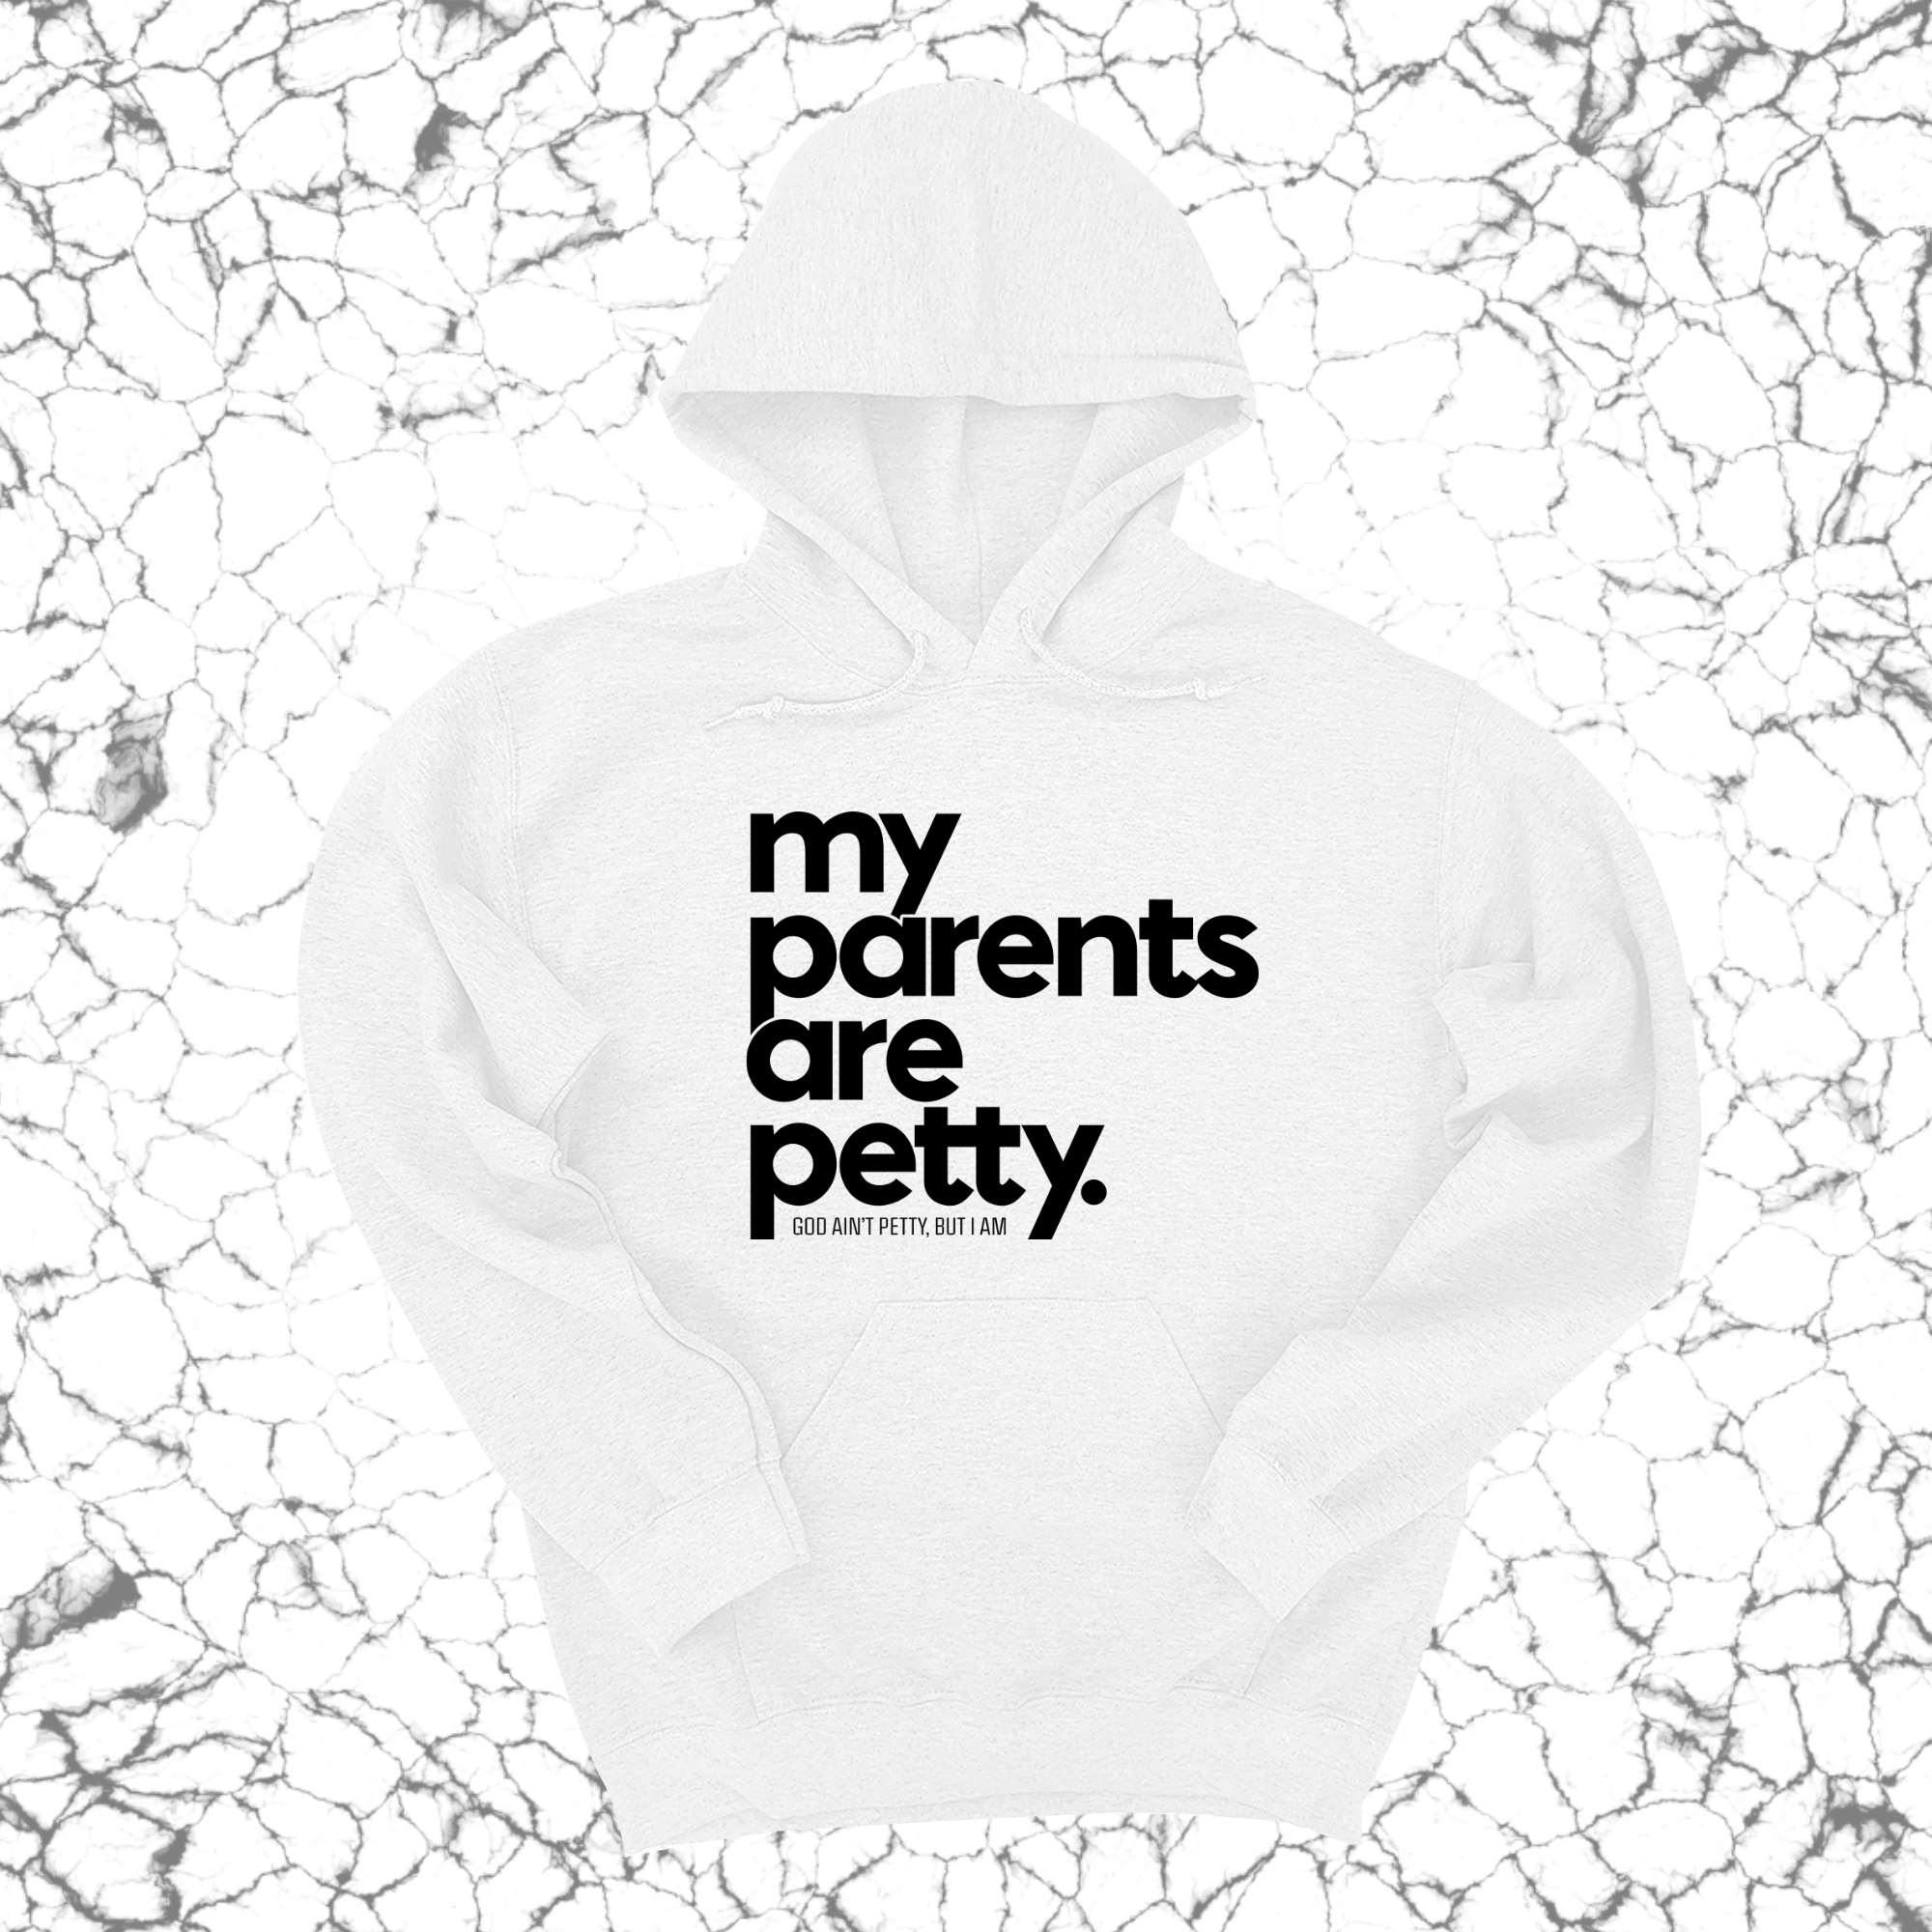 My parents are petty Unisex Hoodie-Hoodie-The Original God Ain't Petty But I Am